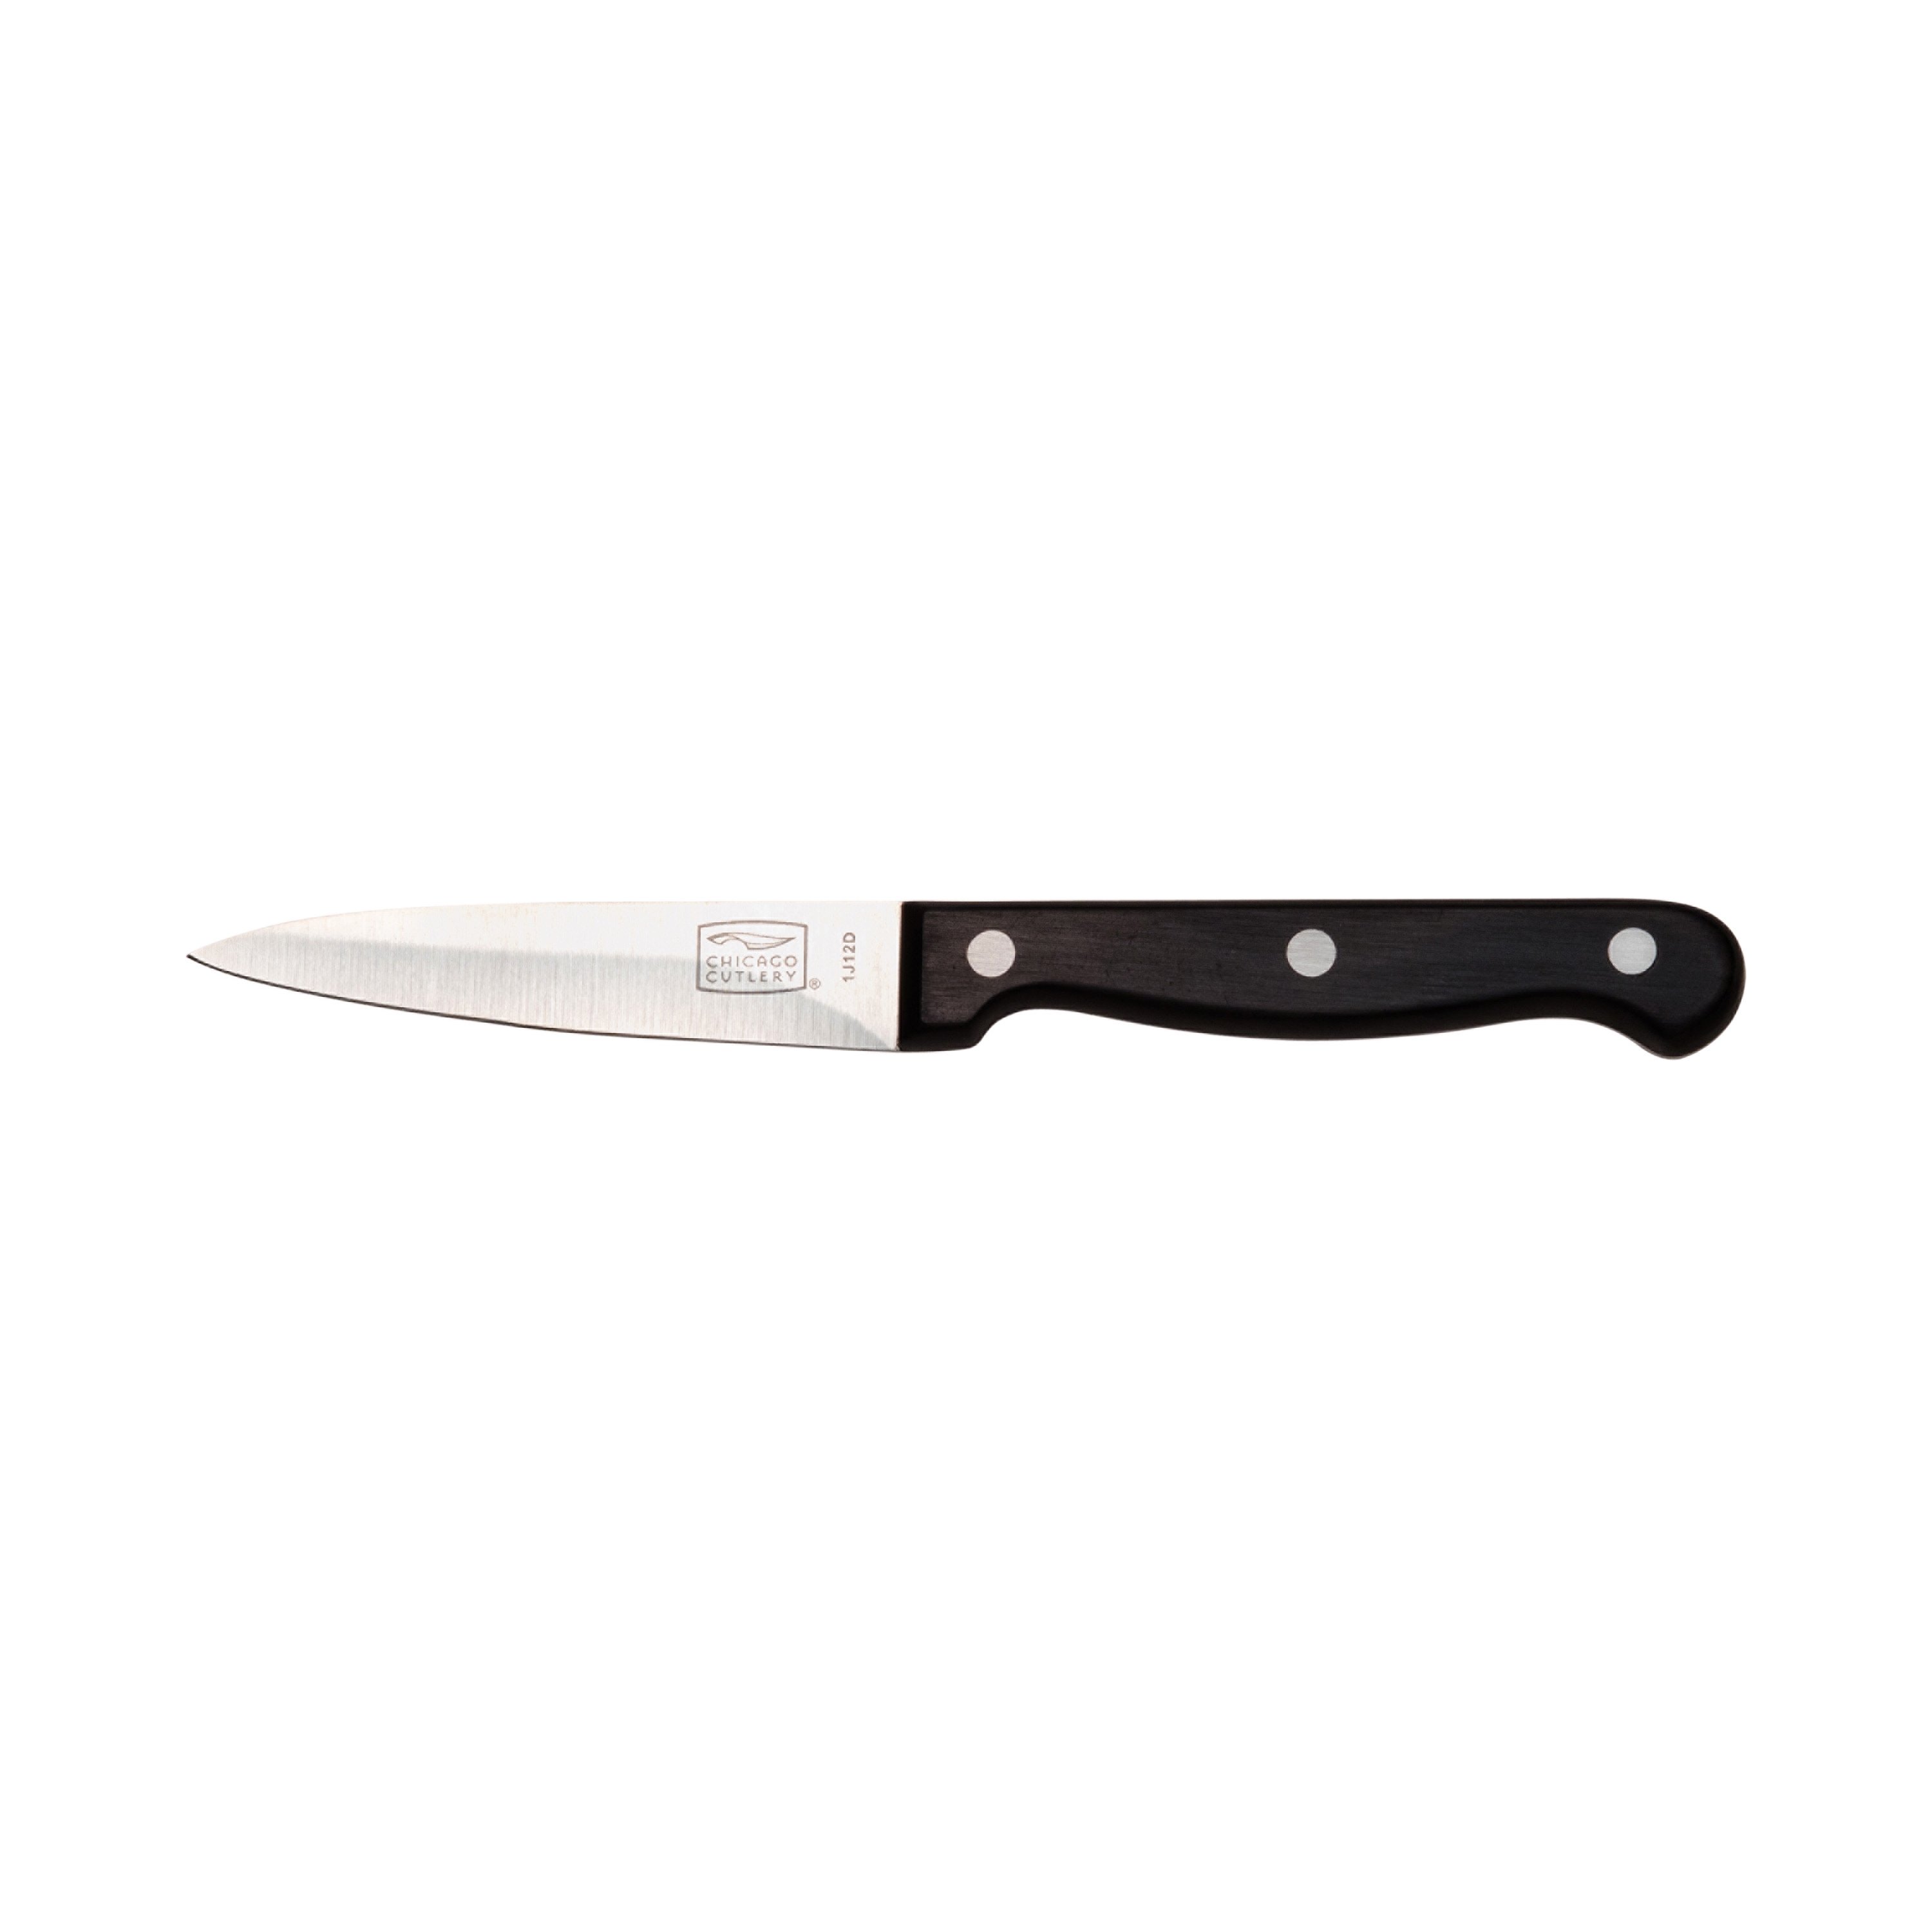 Chicago Cutlery 3.5 in Parer Knife